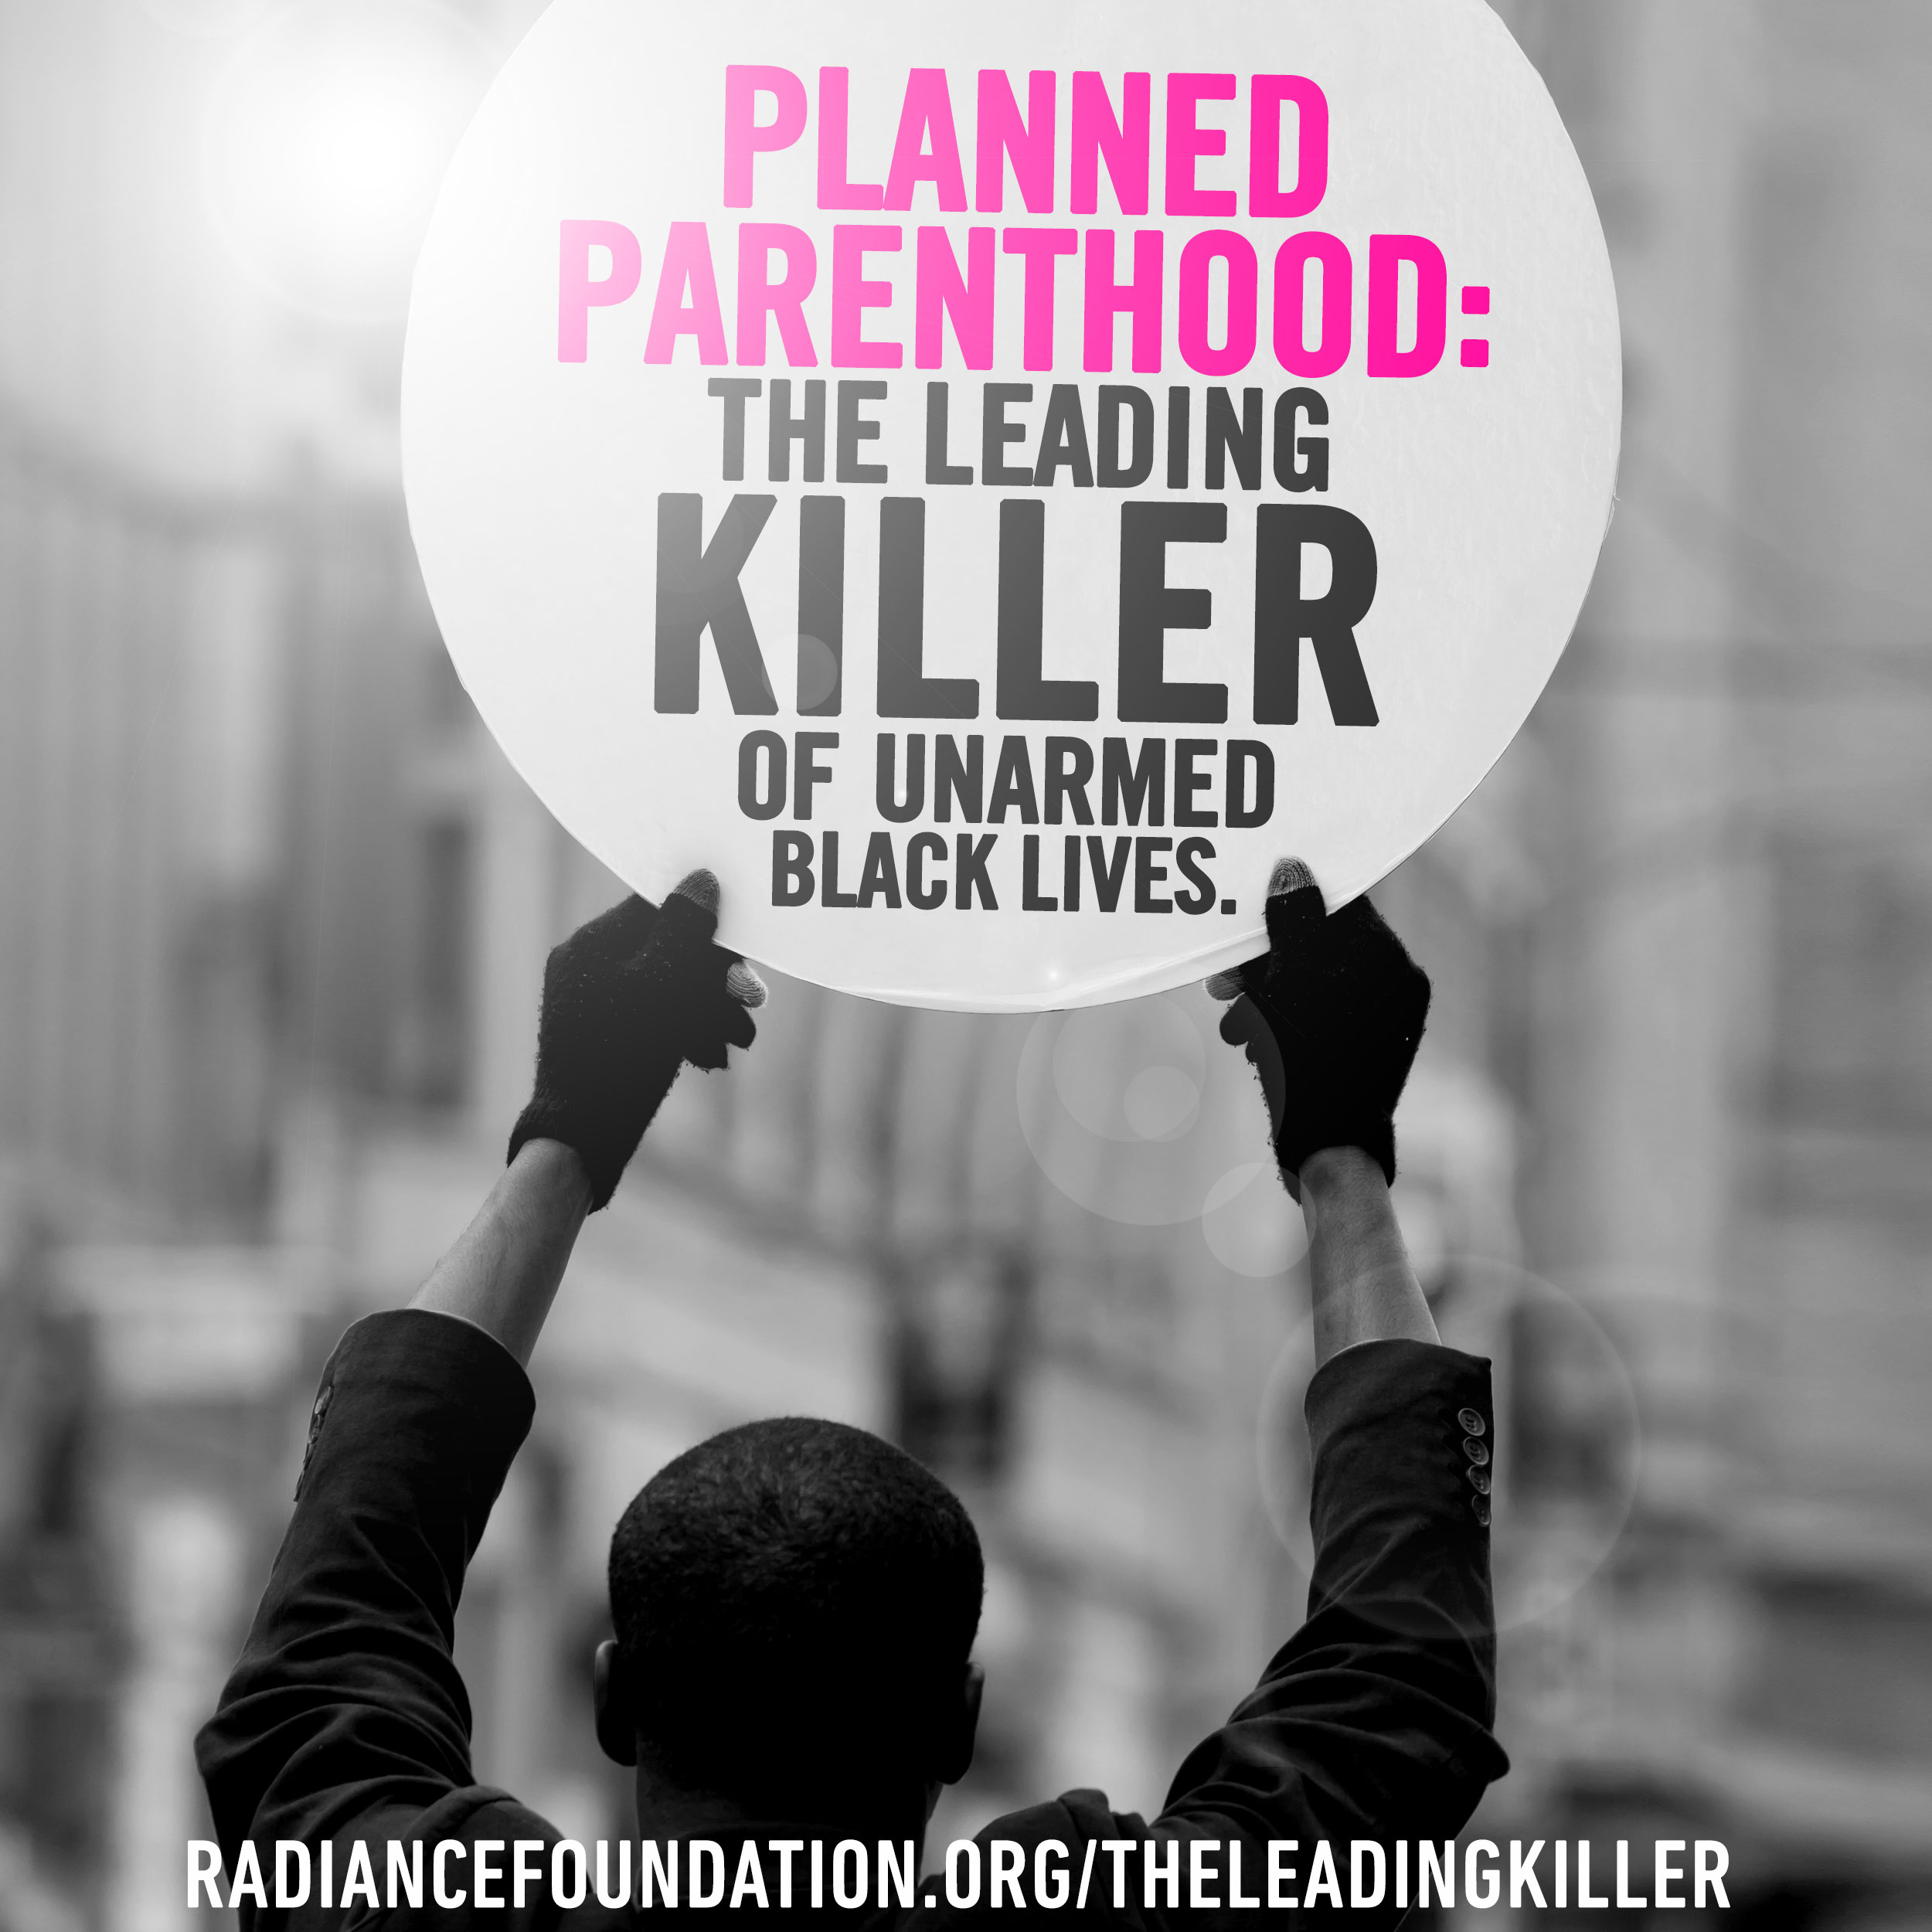 "The Leading Killer" by The Radiance Foundation